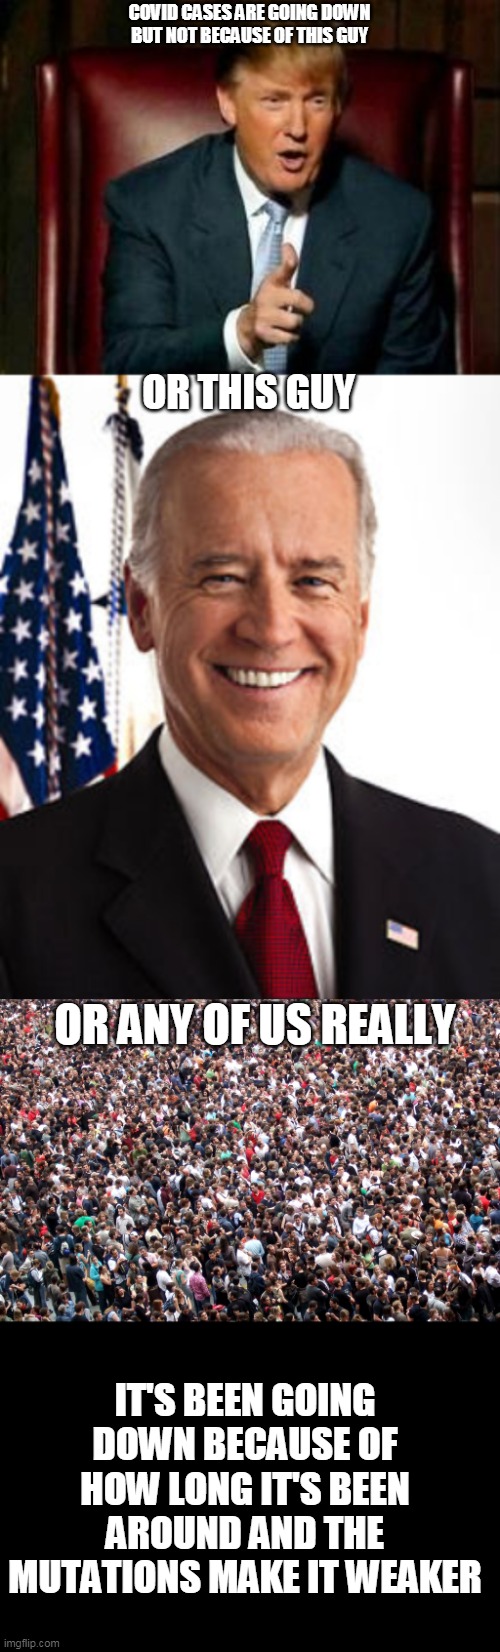 Of course we helped but nothing worked | COVID CASES ARE GOING DOWN
BUT NOT BECAUSE OF THIS GUY; OR THIS GUY; OR ANY OF US REALLY; IT'S BEEN GOING DOWN BECAUSE OF HOW LONG IT'S BEEN AROUND AND THE MUTATIONS MAKE IT WEAKER | image tagged in donald trump,memes,joe biden,crowd of people,covid-19 | made w/ Imgflip meme maker